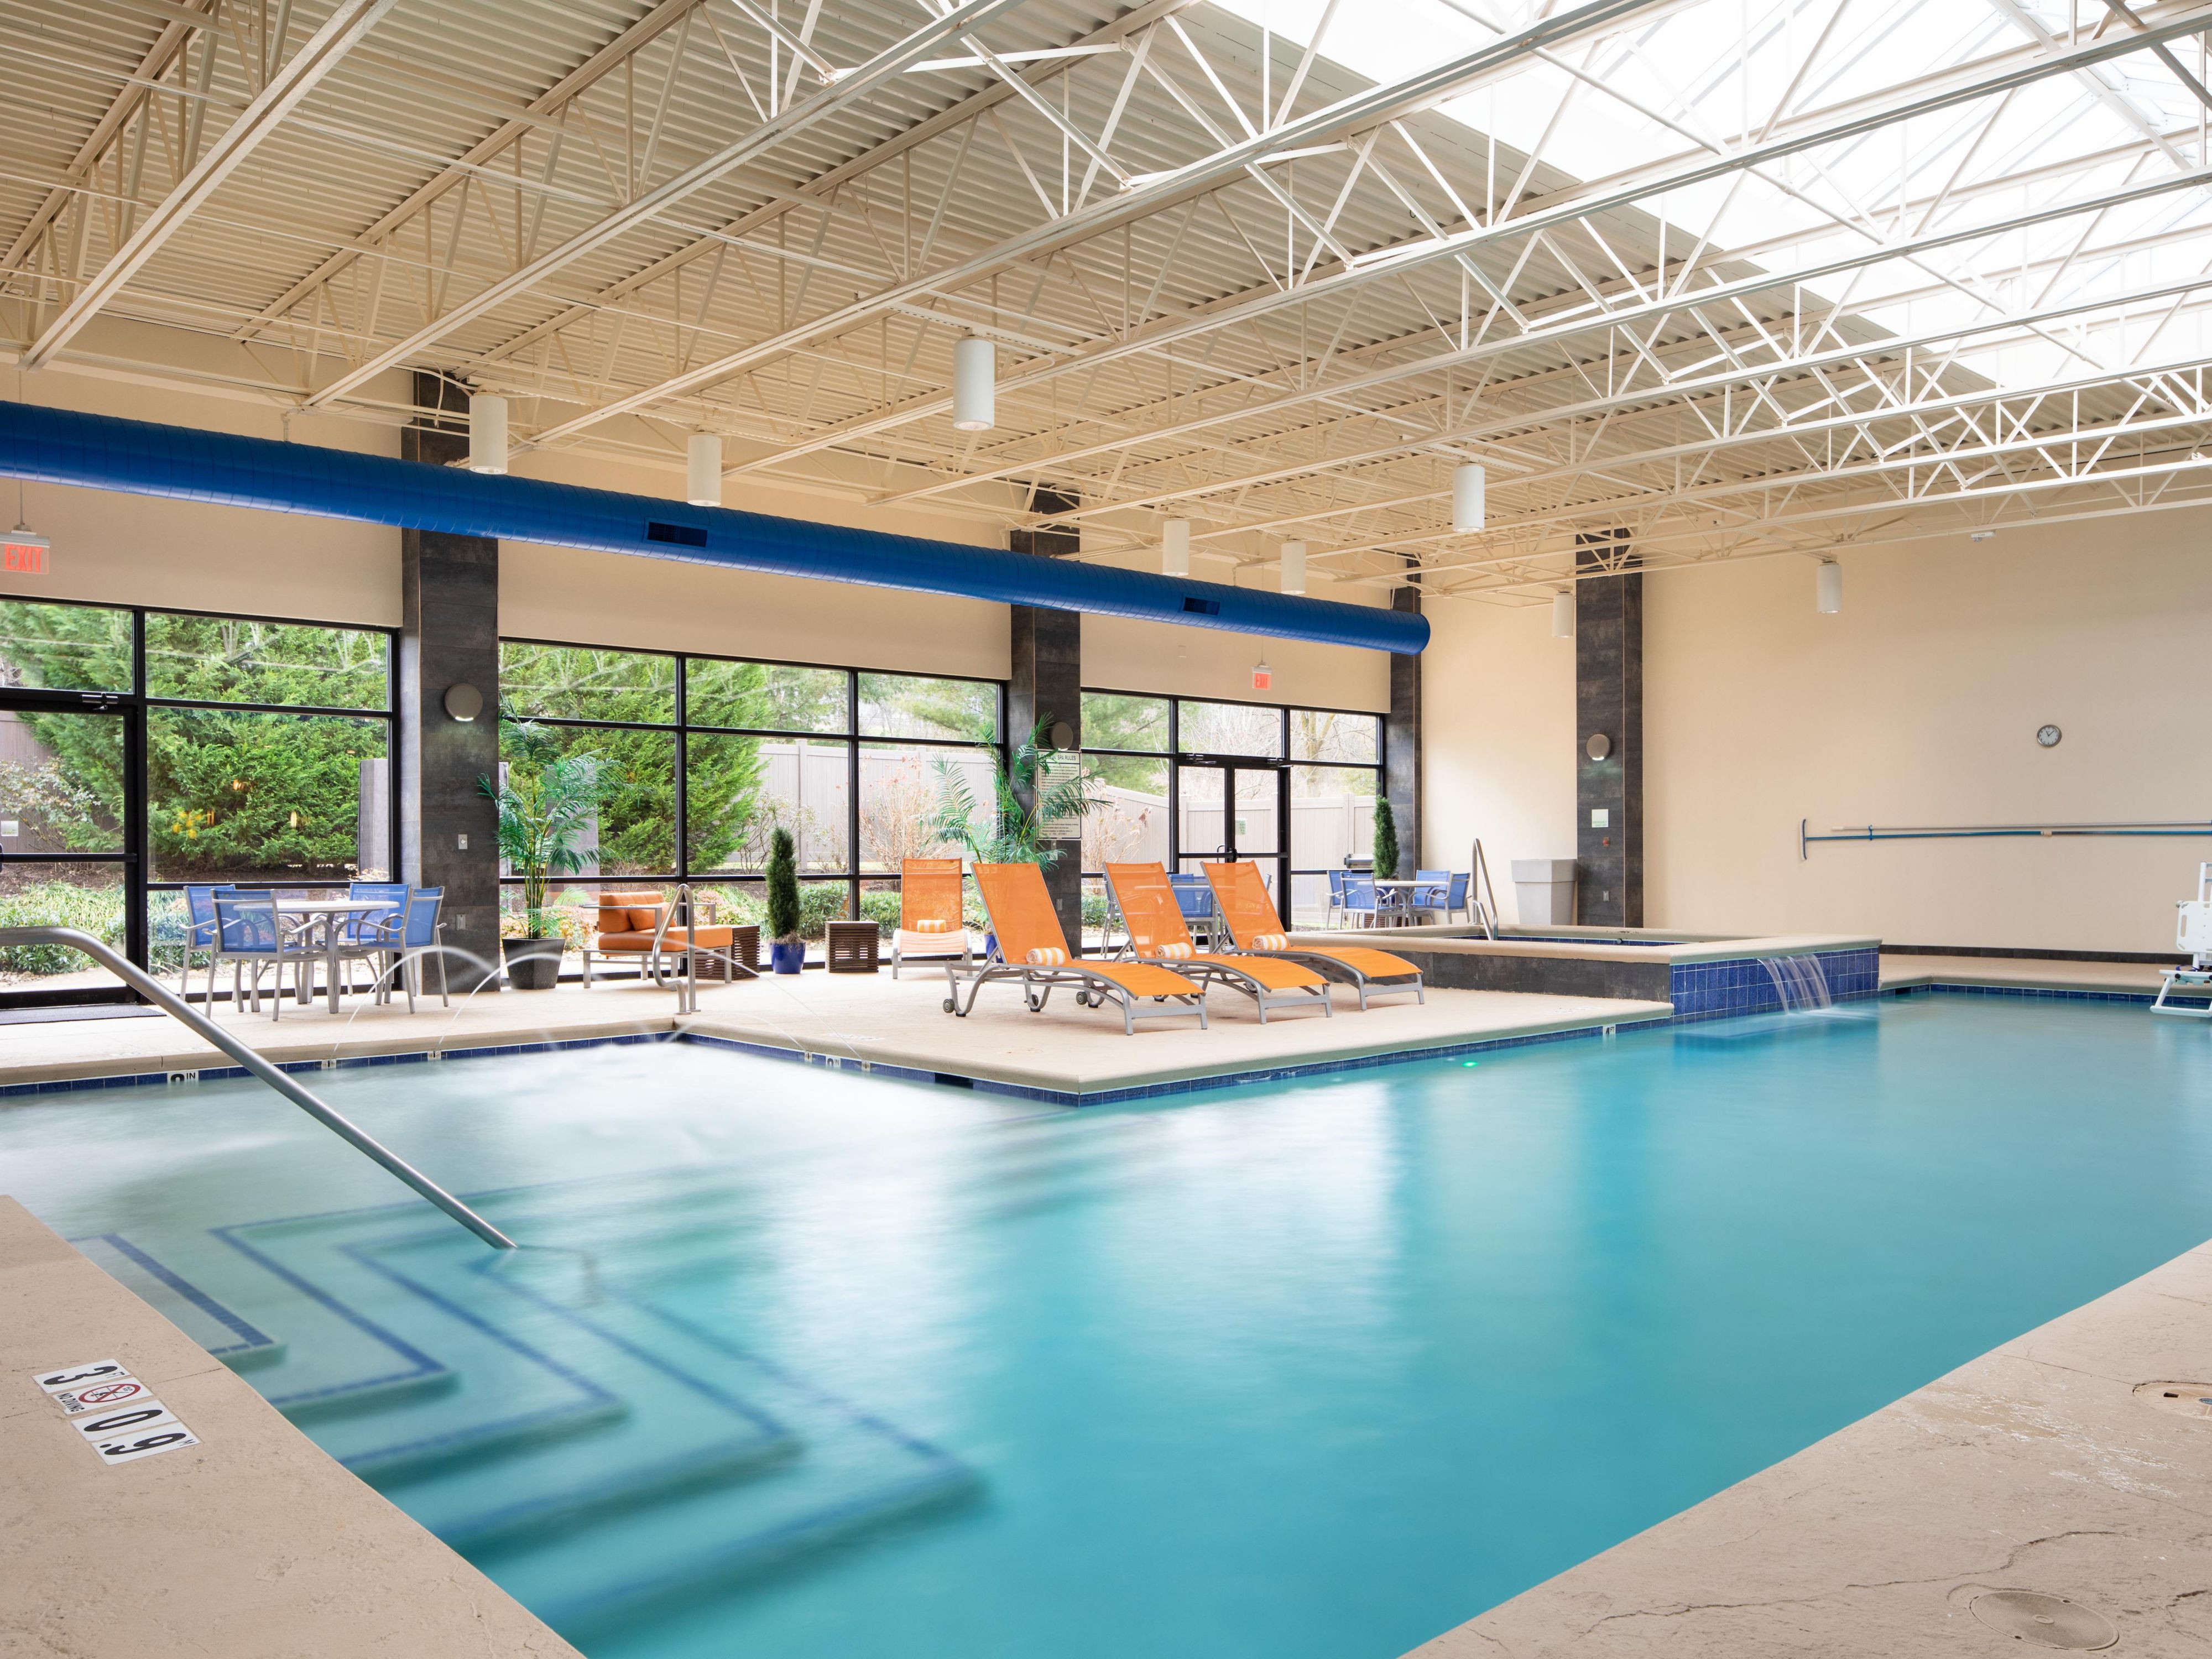 Treat yourself to a dip in our indoor saltwater pool and whirlpool hot tub or pull up a chaise lounge and relax poolside with a good book while the kids splash and swim. Open year-round, our heated pool is the perfect place to kick-start your day or soak away your cares after sundown. 